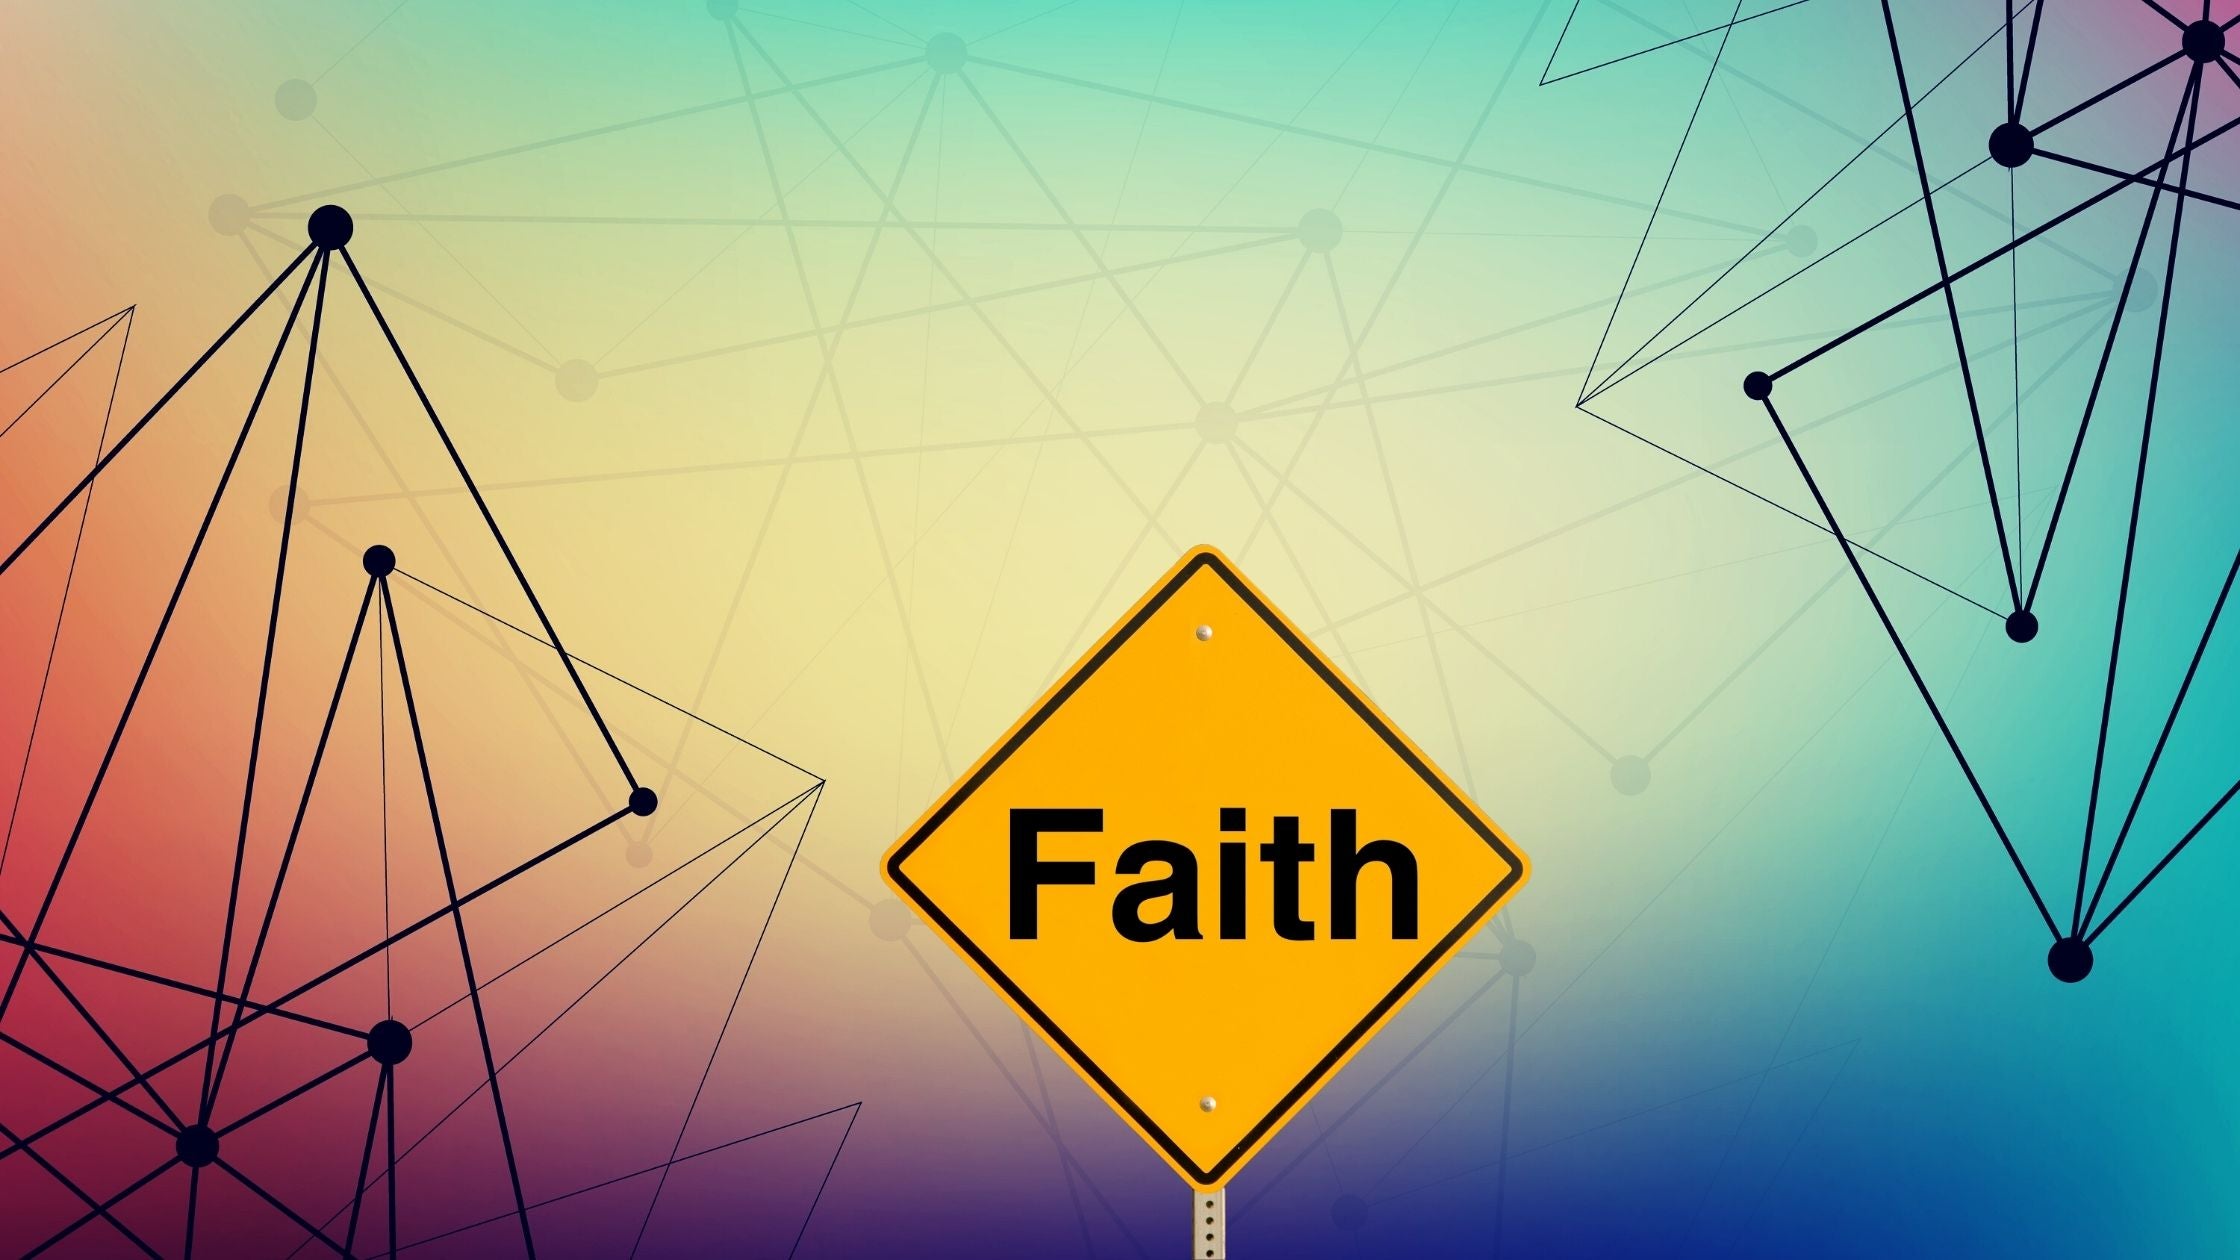 The Different Stages of Submission & Faith